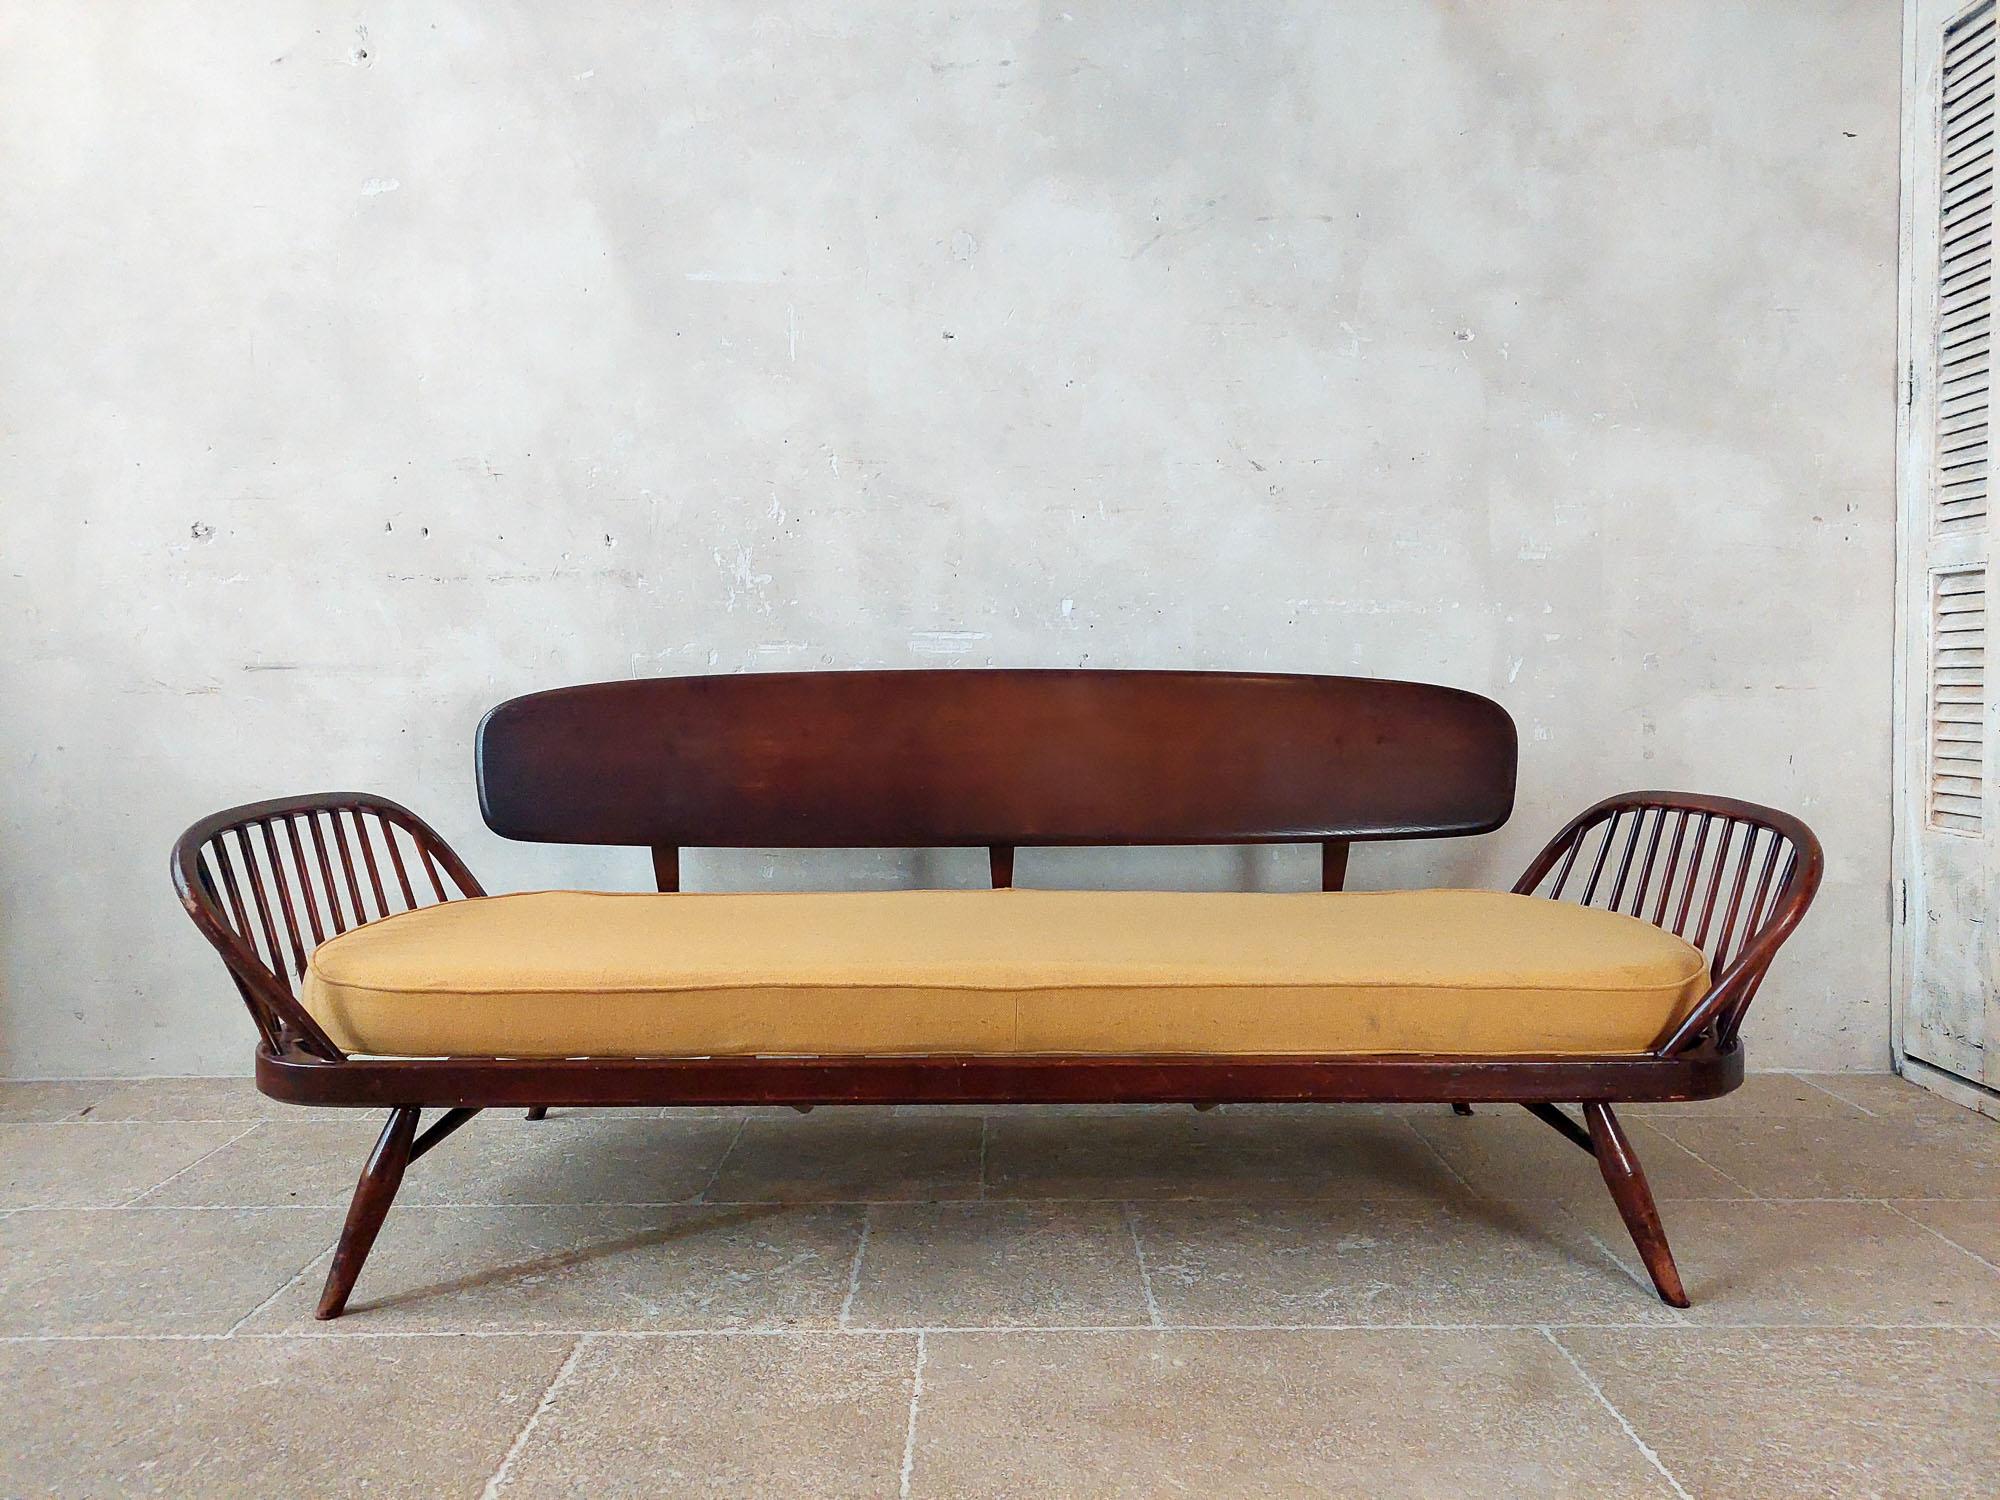 Mid-century design Ercol Sofa (Studio Couch) designed by Lucian Ercolani around the 1960s.

The frame and backrest of the sofa are made of solid elm wood. The backrest is easy to remove so you can also use this vintage sofa as a daybed. The